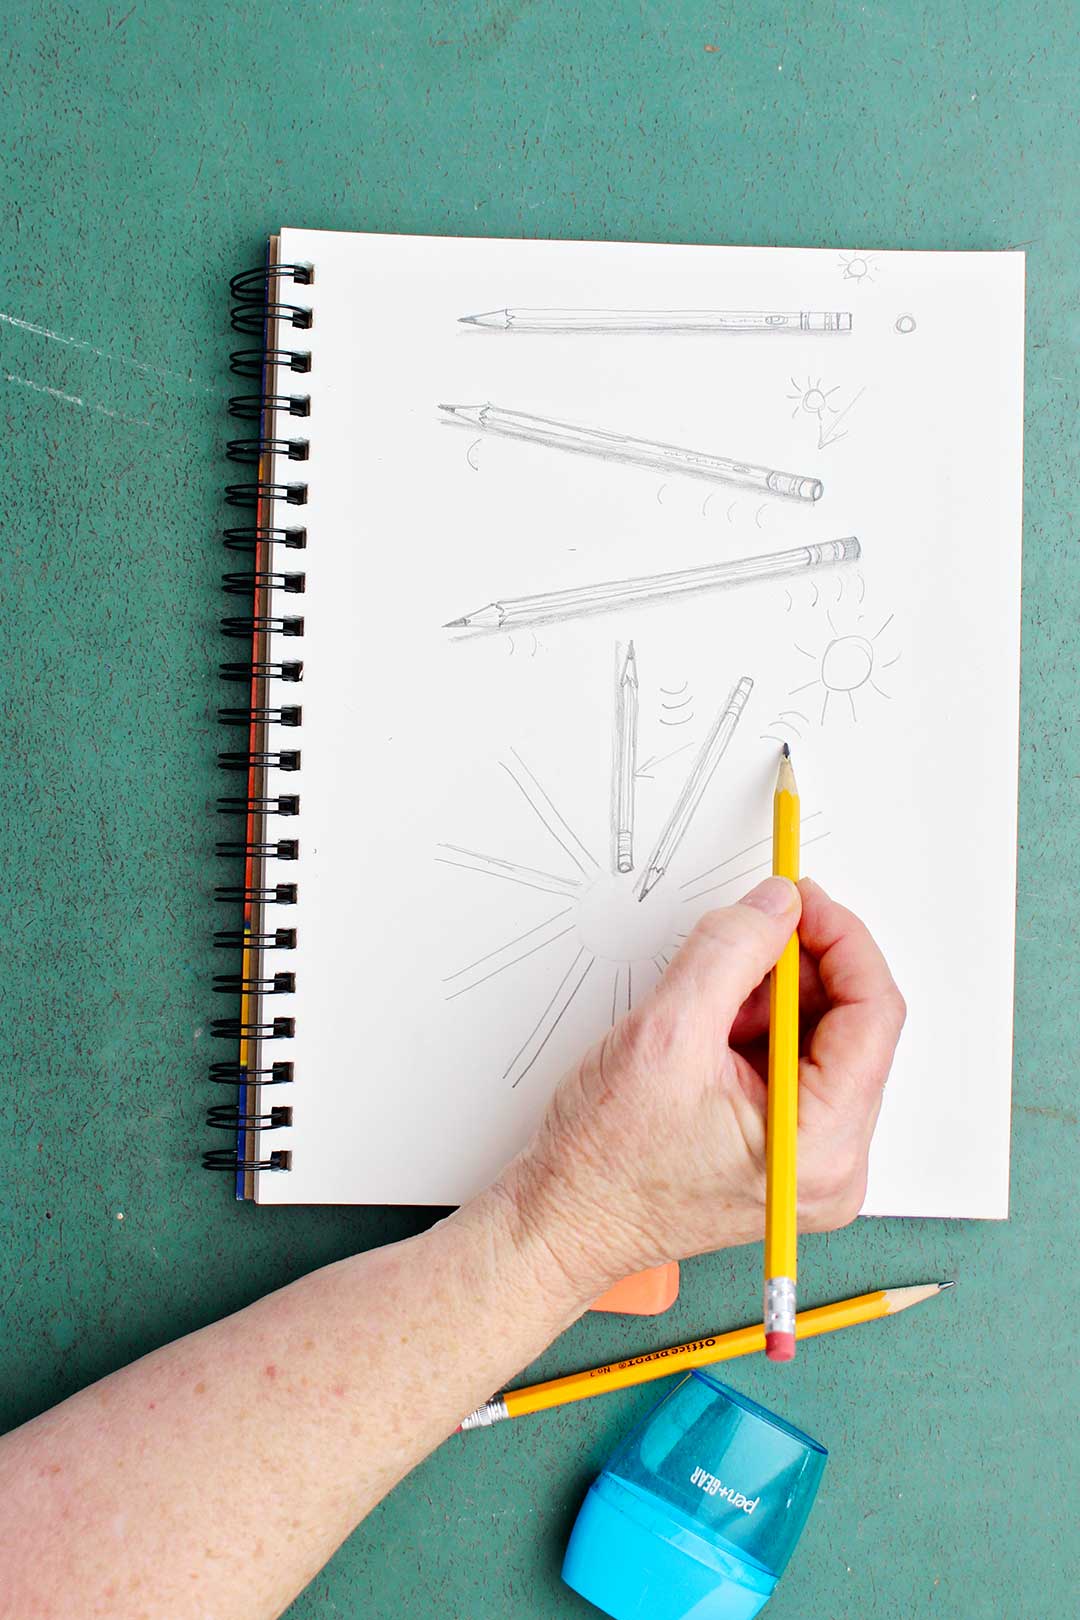 Hand showing direction of lines for pencils drawn in different directions.